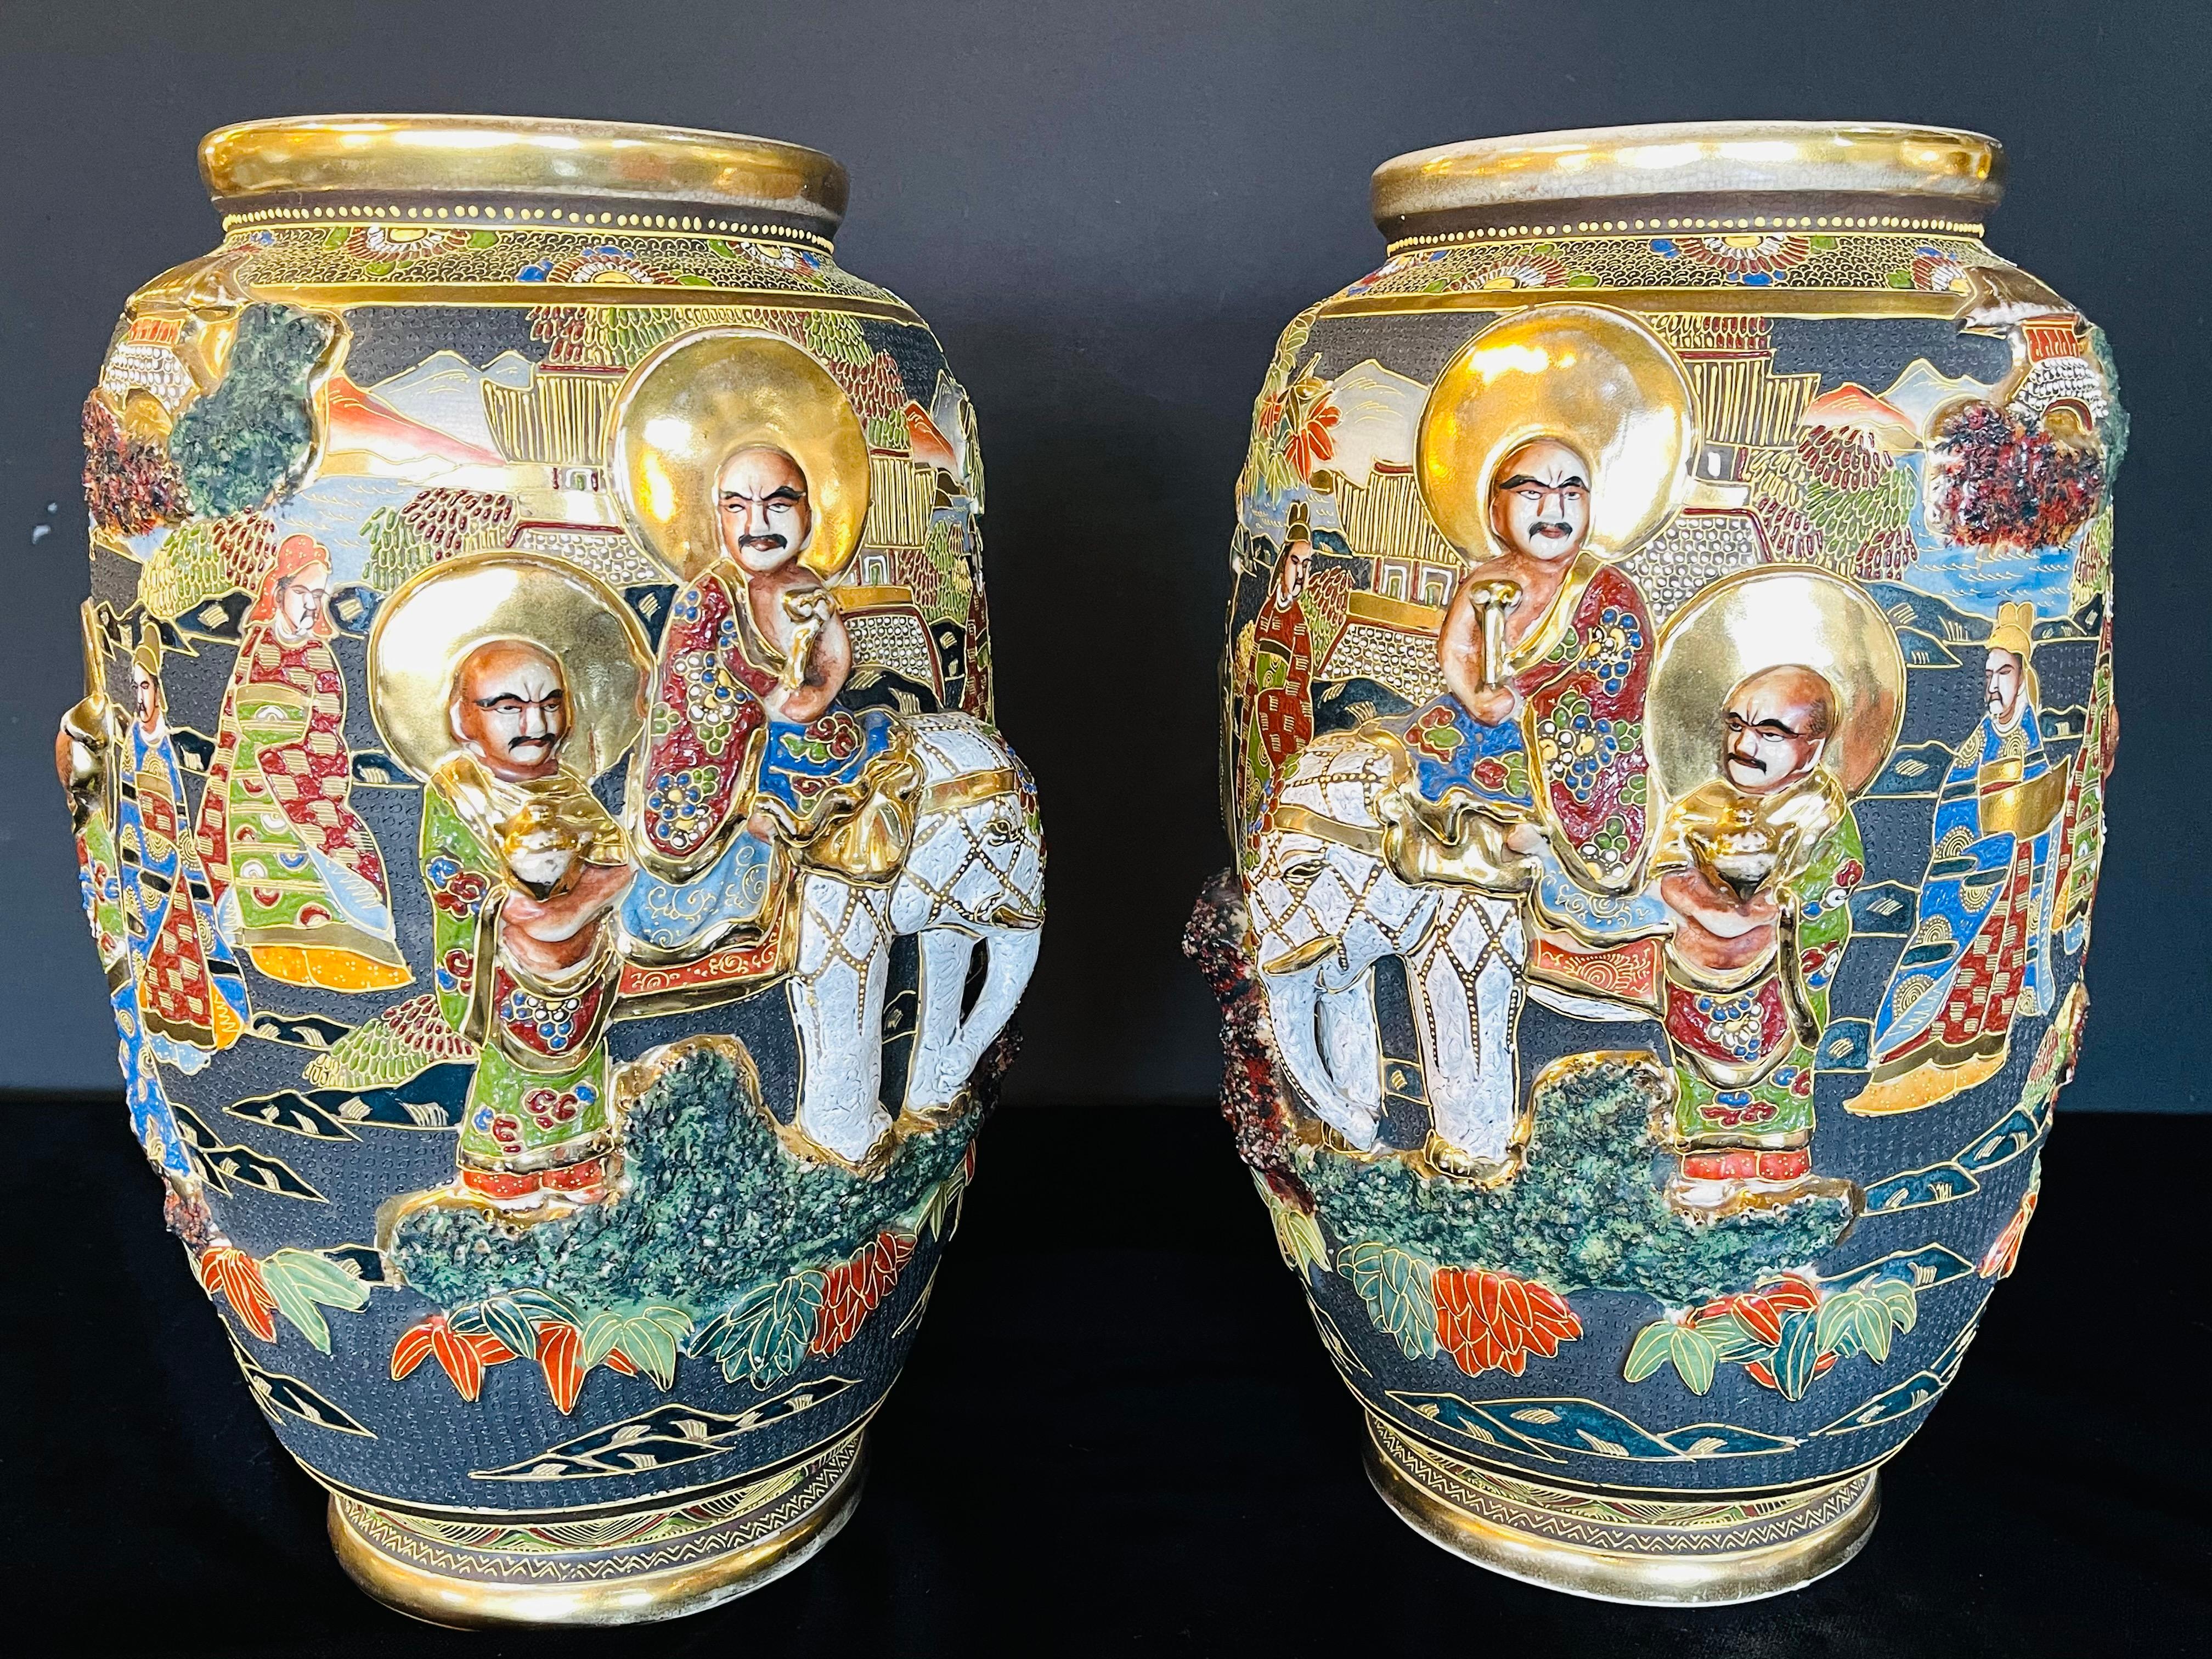 Pair of antique Japanese Satsuma vases. Each with opposing Scenes of figures and raised elephants. The pair in good condition.